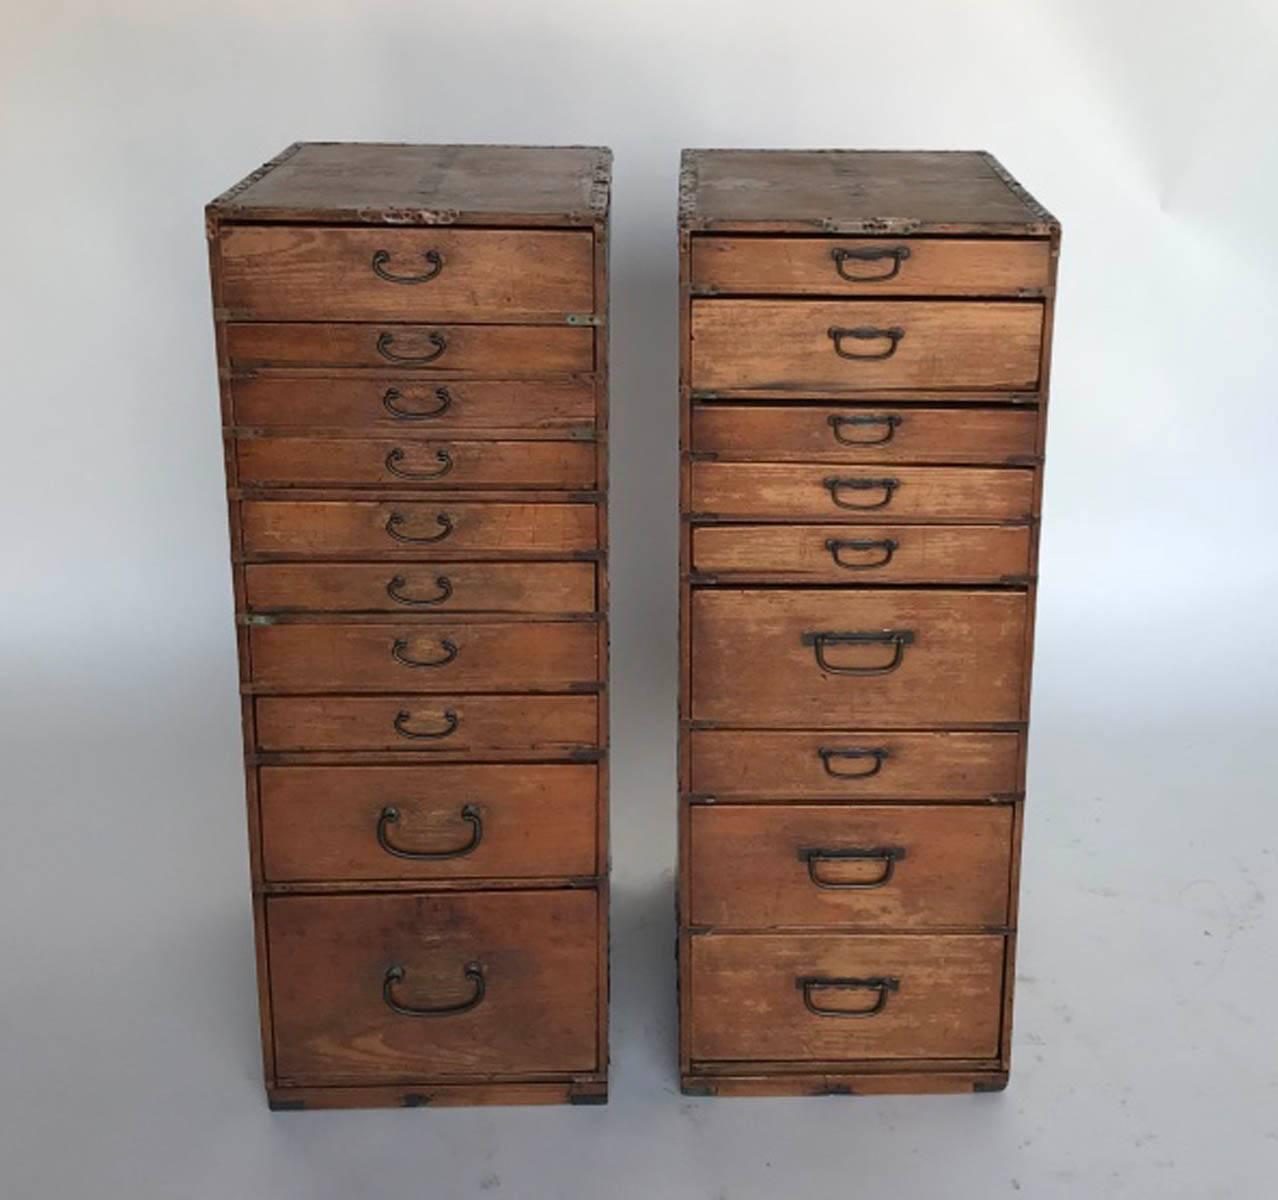 These are two old shop cabinets from Japan. Hinoki wood. Shallow drawers with metal pulls. All original hardware. They are the same overall size but not matching. Drawer depth and pulls are different on each one. Perfect for jewelry or other small